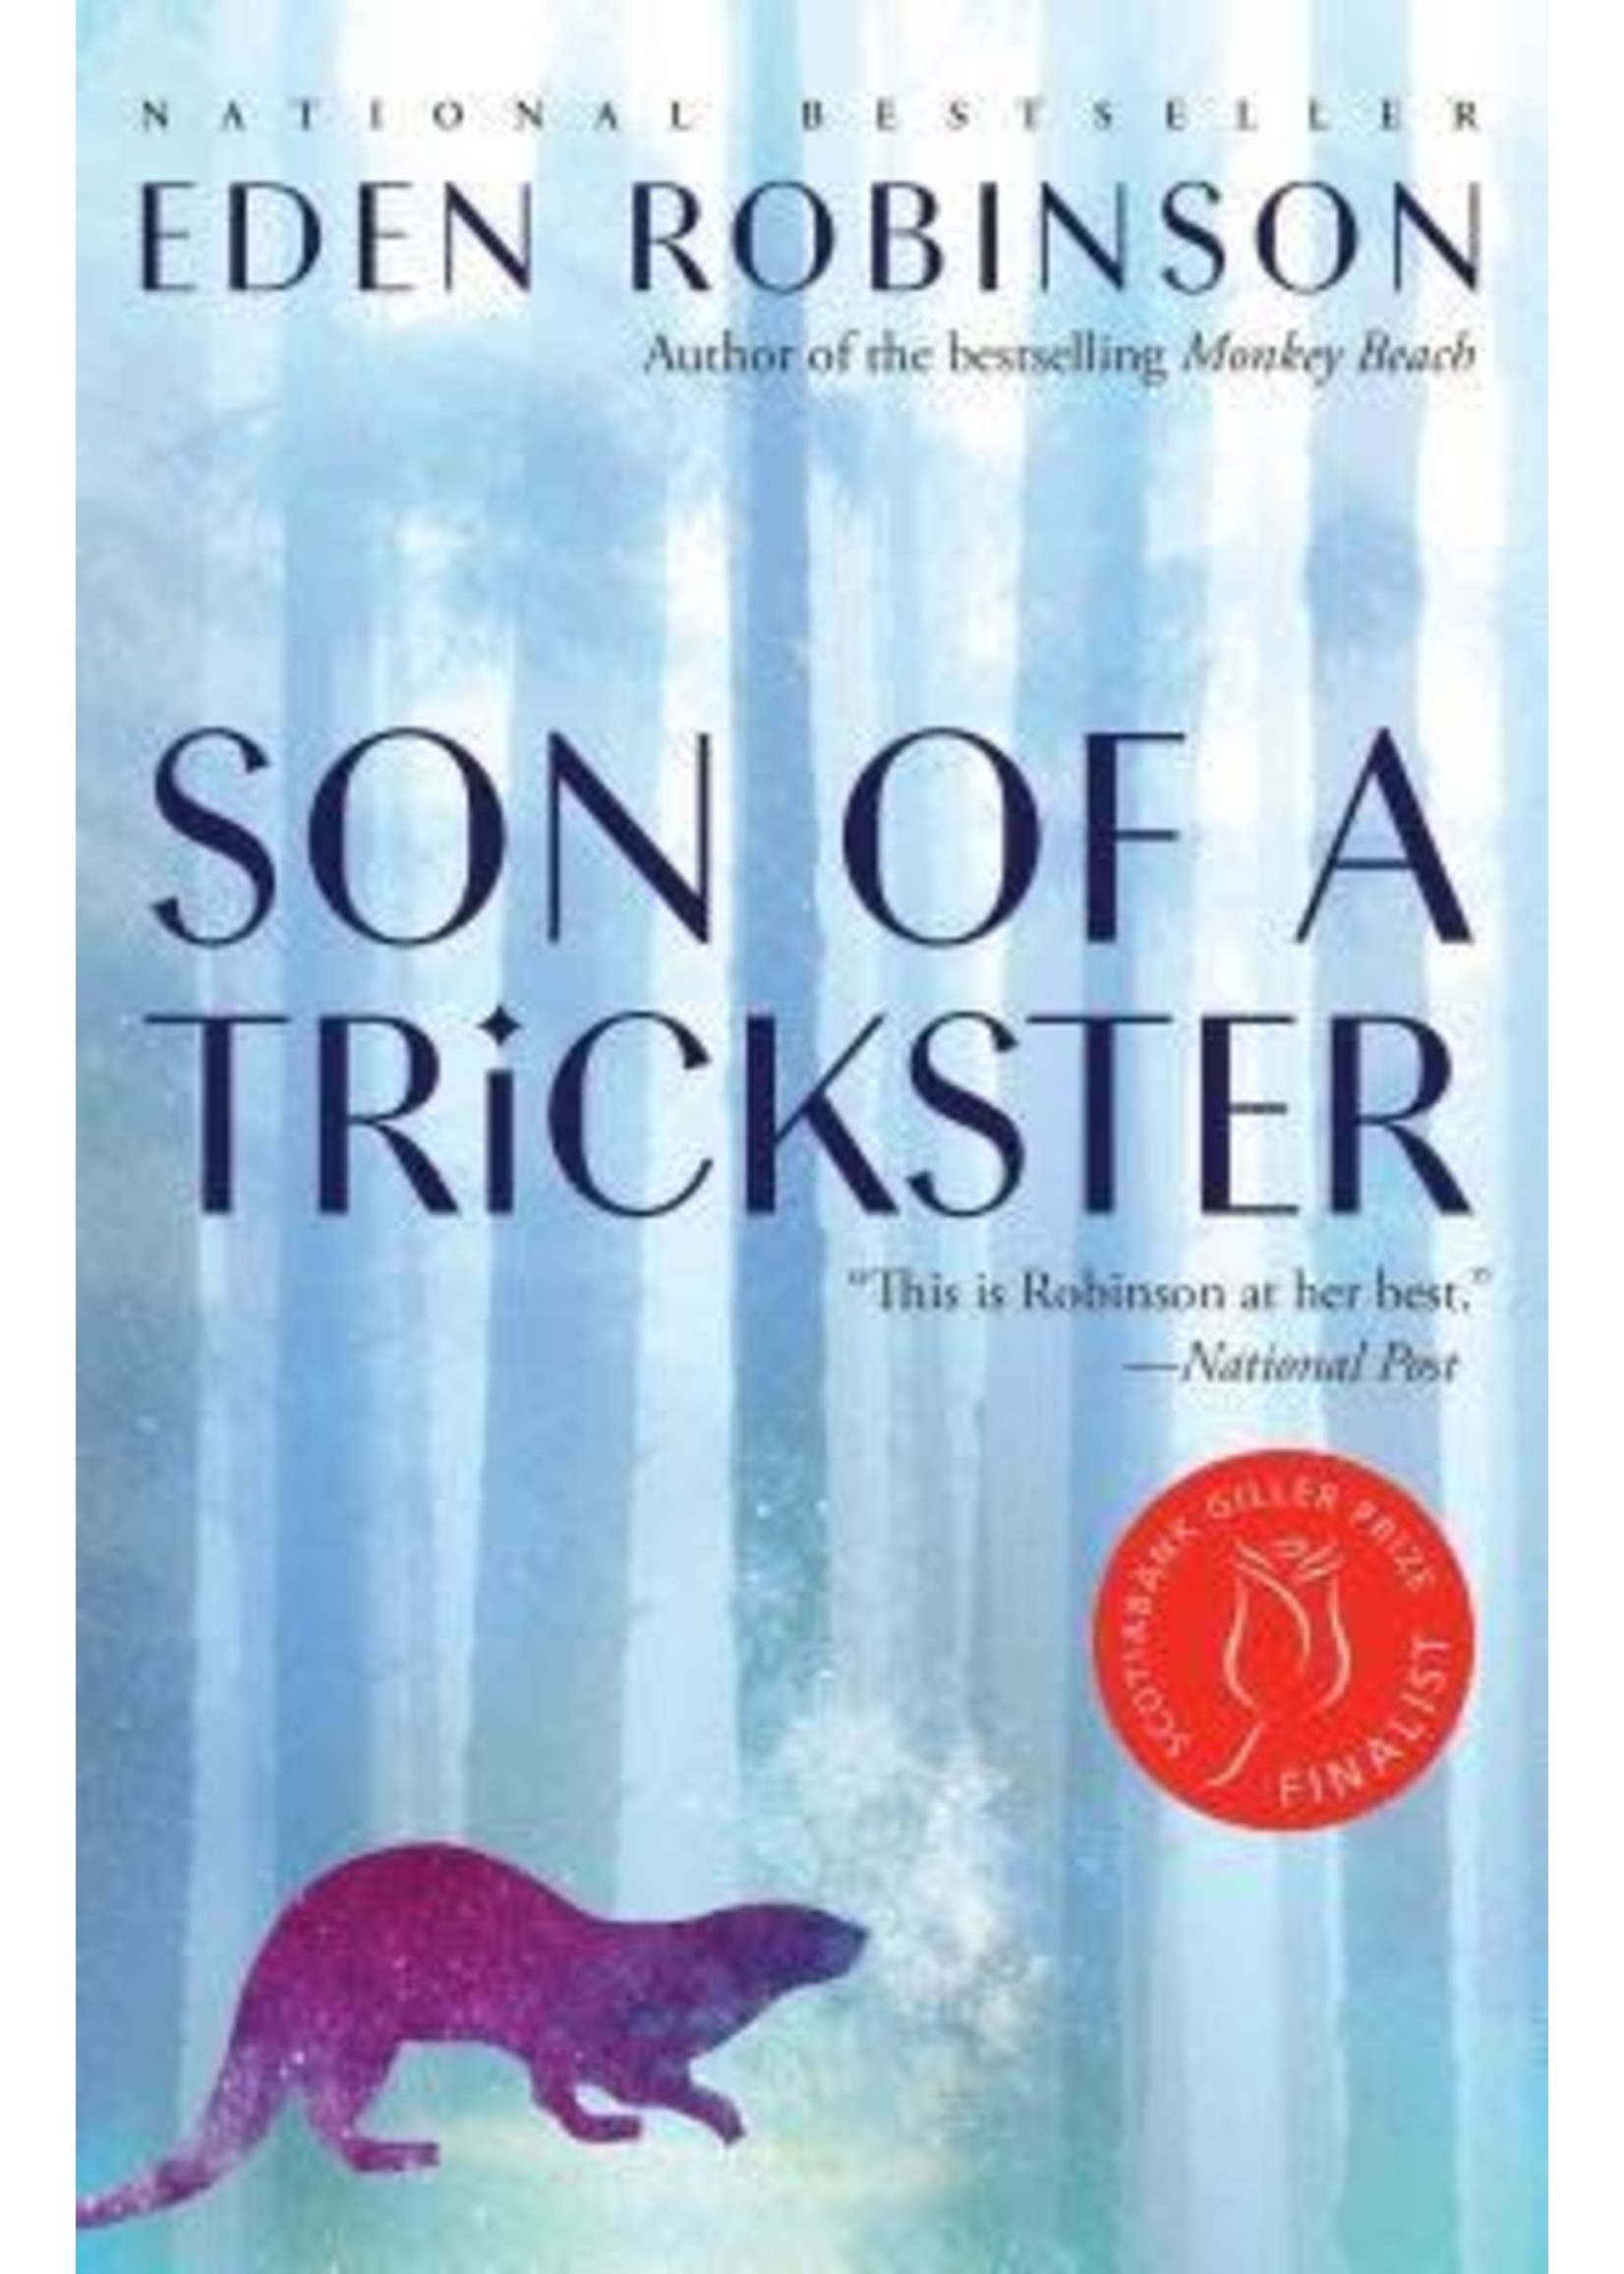 Son of a Trickster (Trickster #1) by Eden Robinson